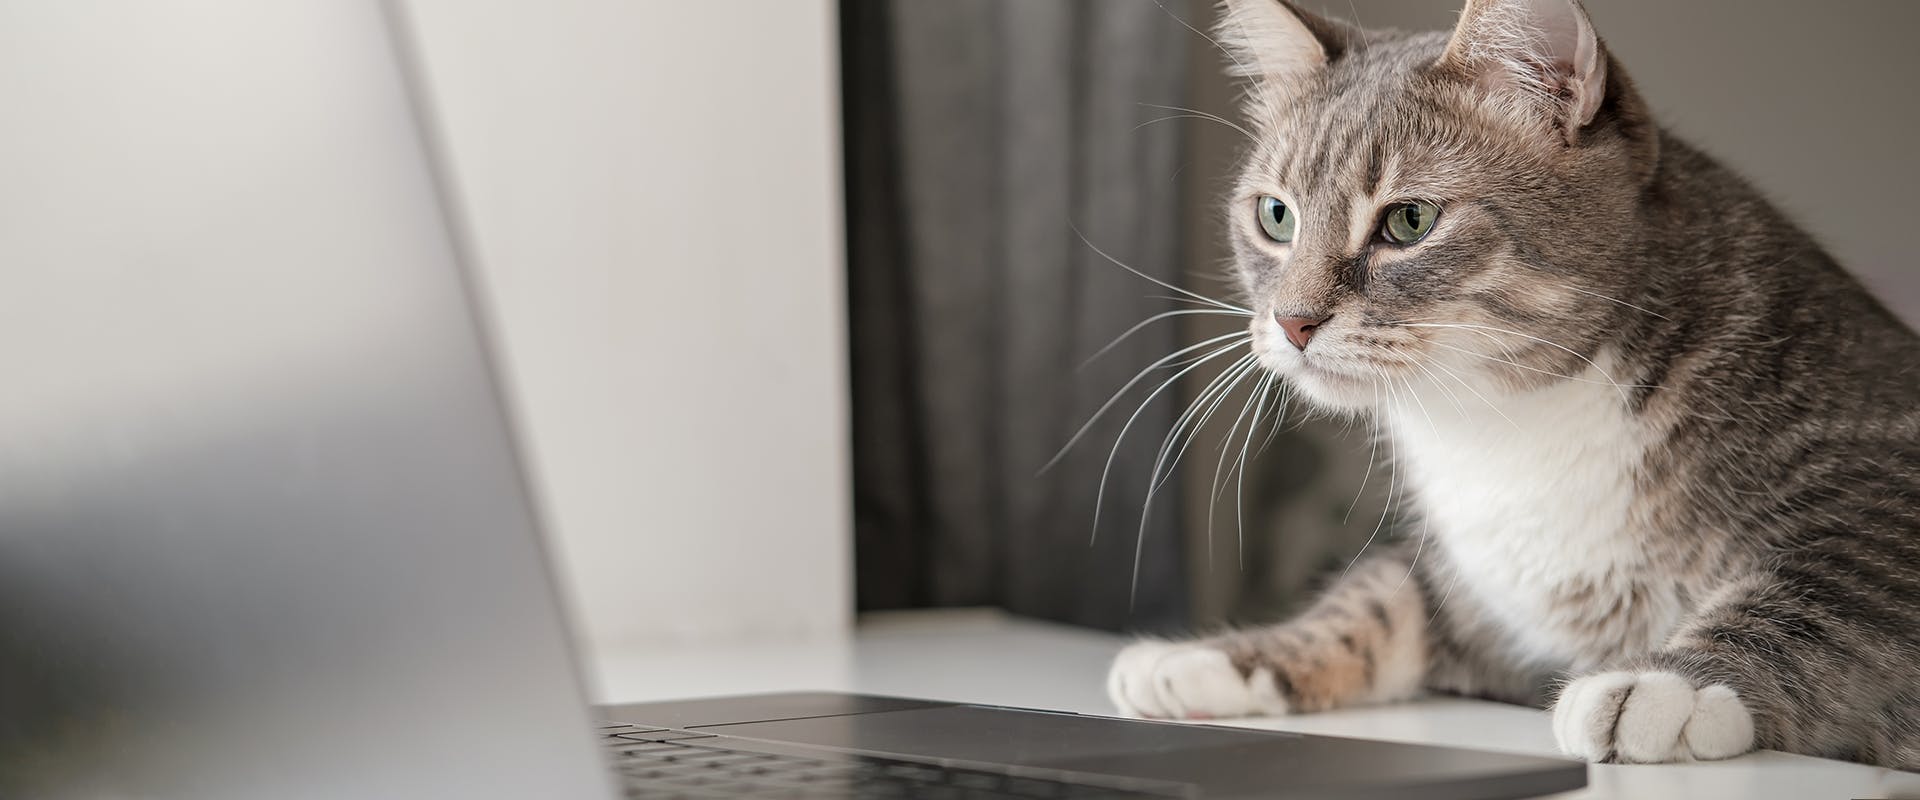 A cat sitting with its paws on a table, looking at an open laptop